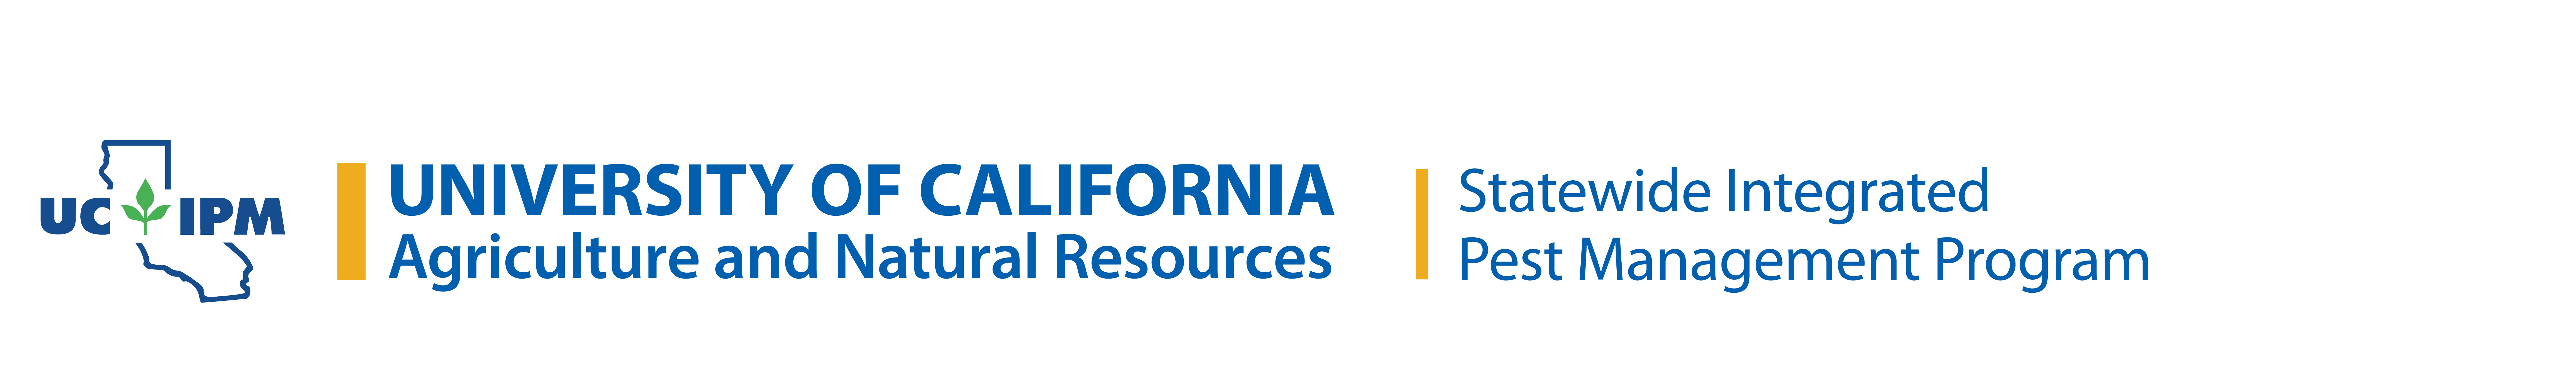 Logo: University of California (UC) Statewide Integrated Pest Management Program and UC Agriculture and Natural Resources